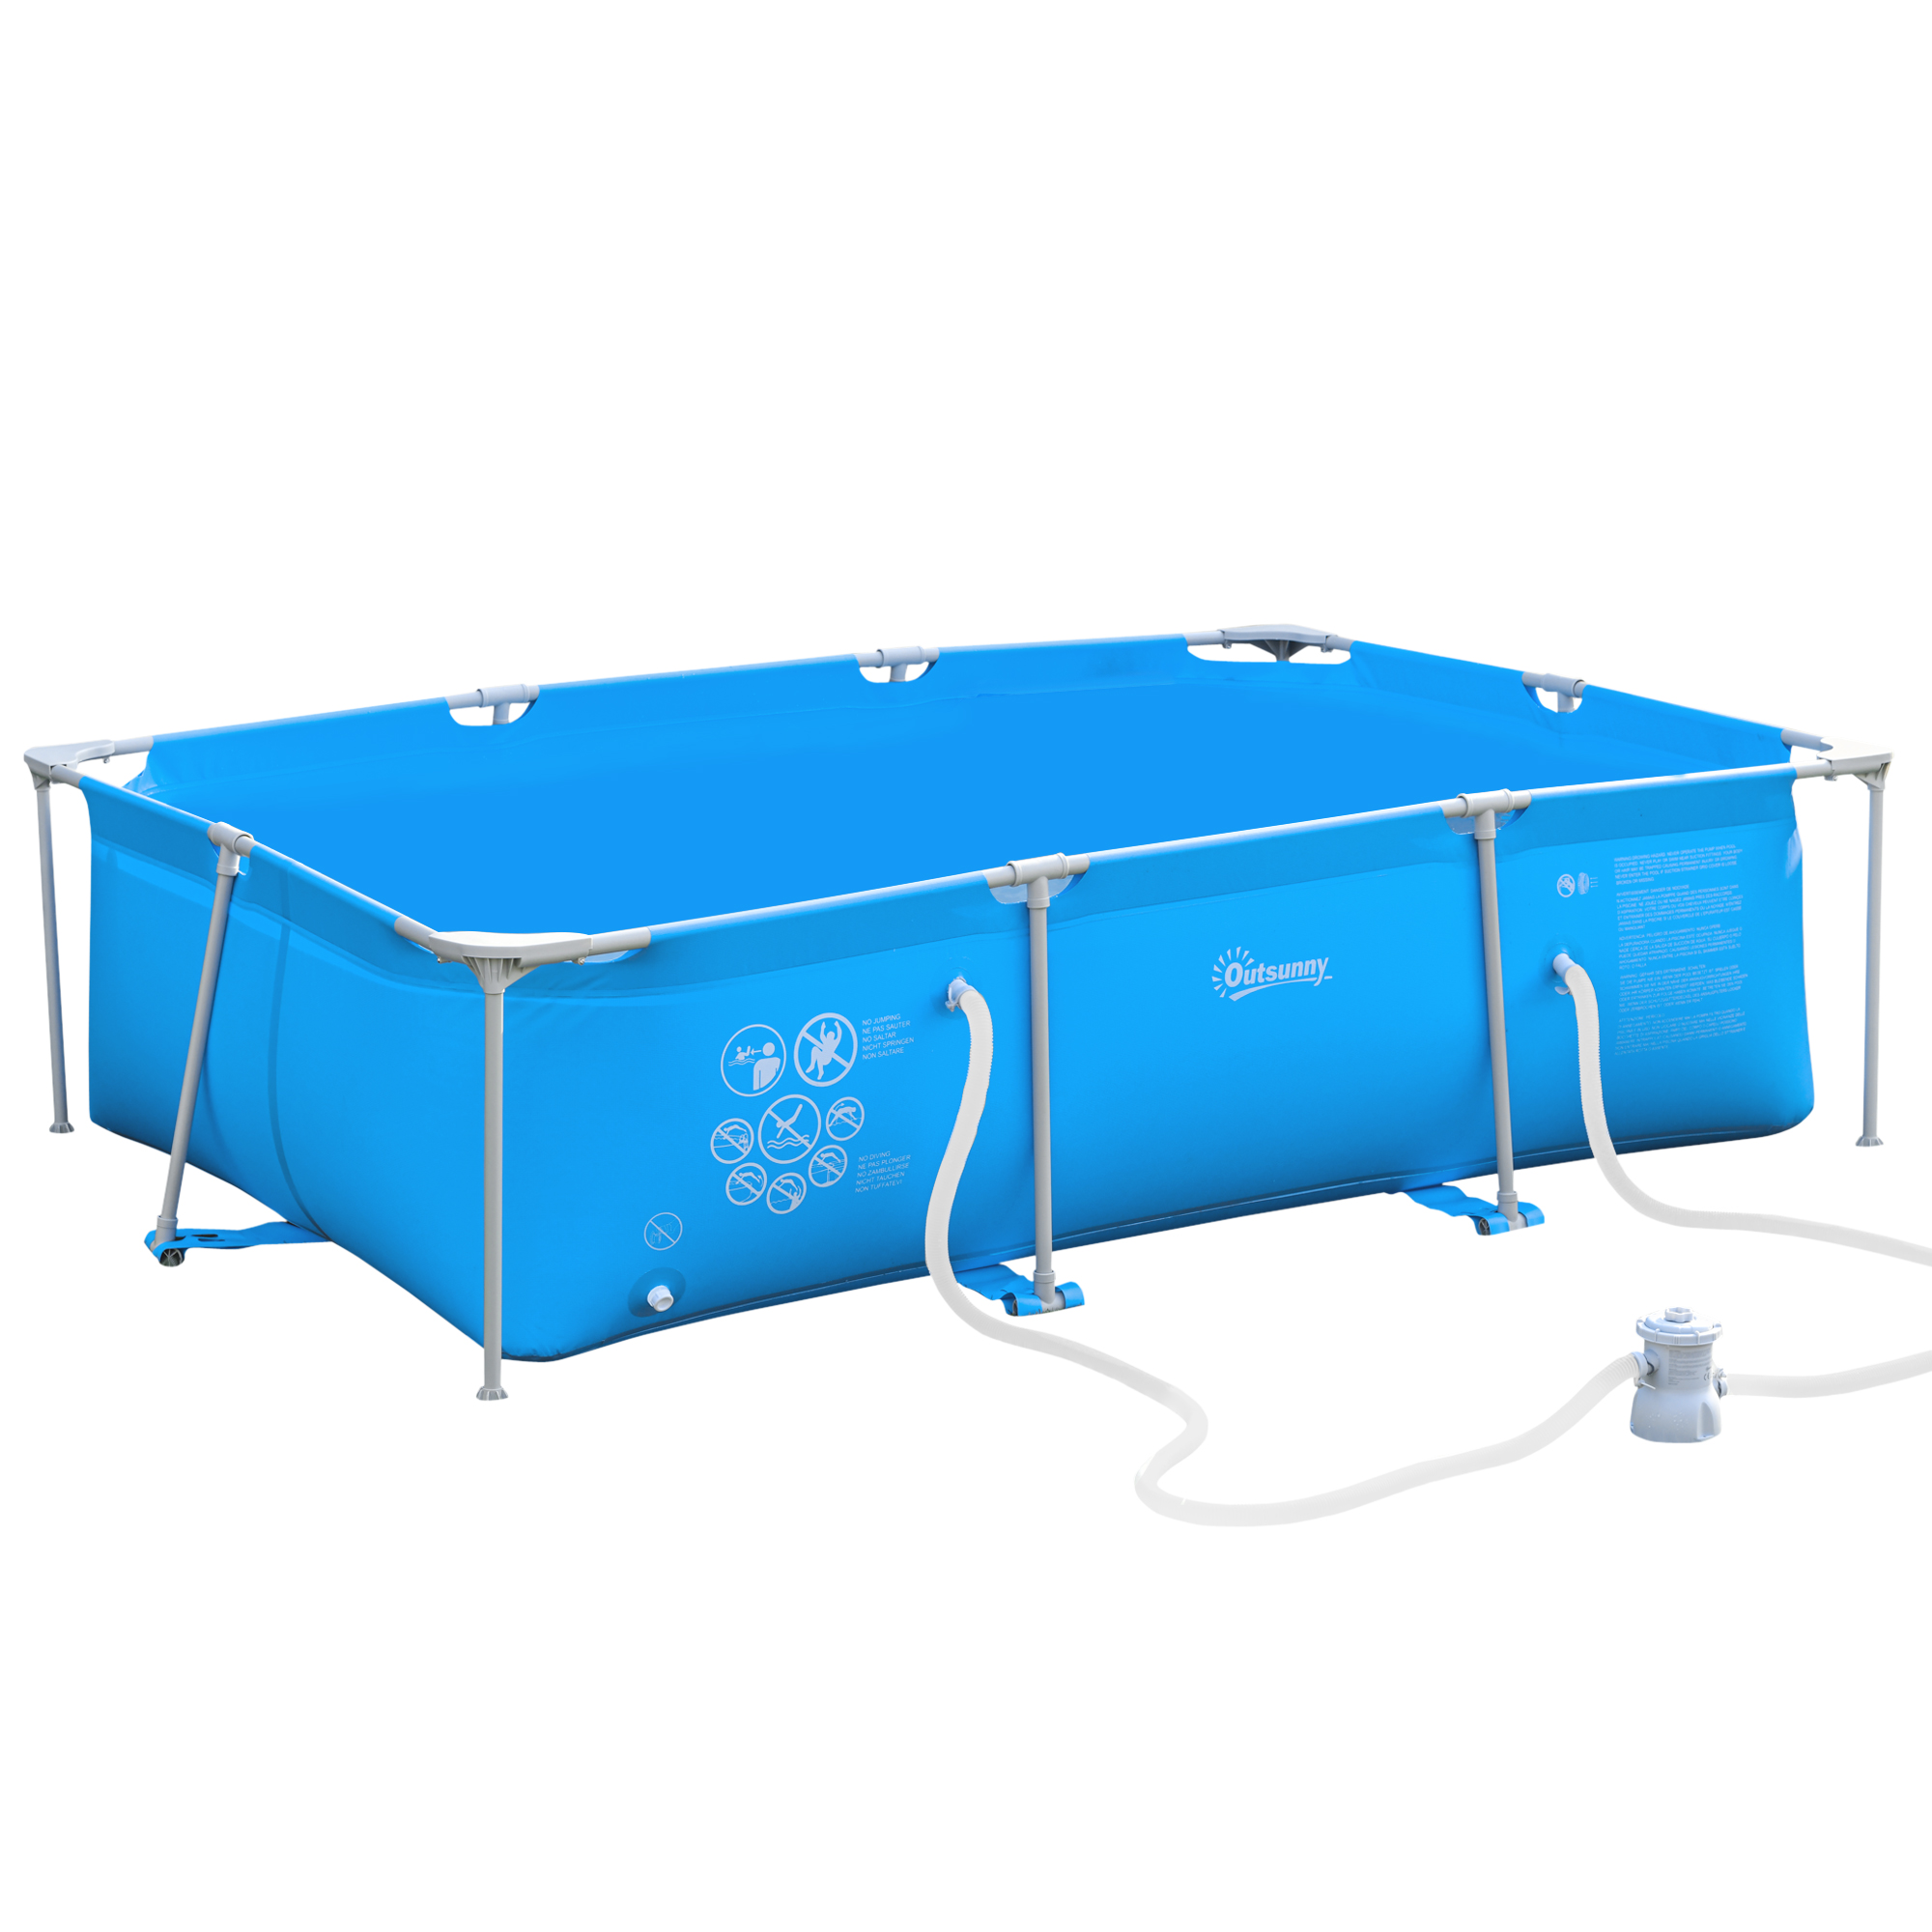 Outsunny Steel Frame Pool With Filter Pump And Filter Cartridge Rust Resistant Above Ground Pool With Reinforced Sidewalls, 252 X 152 X 65cm, Blue